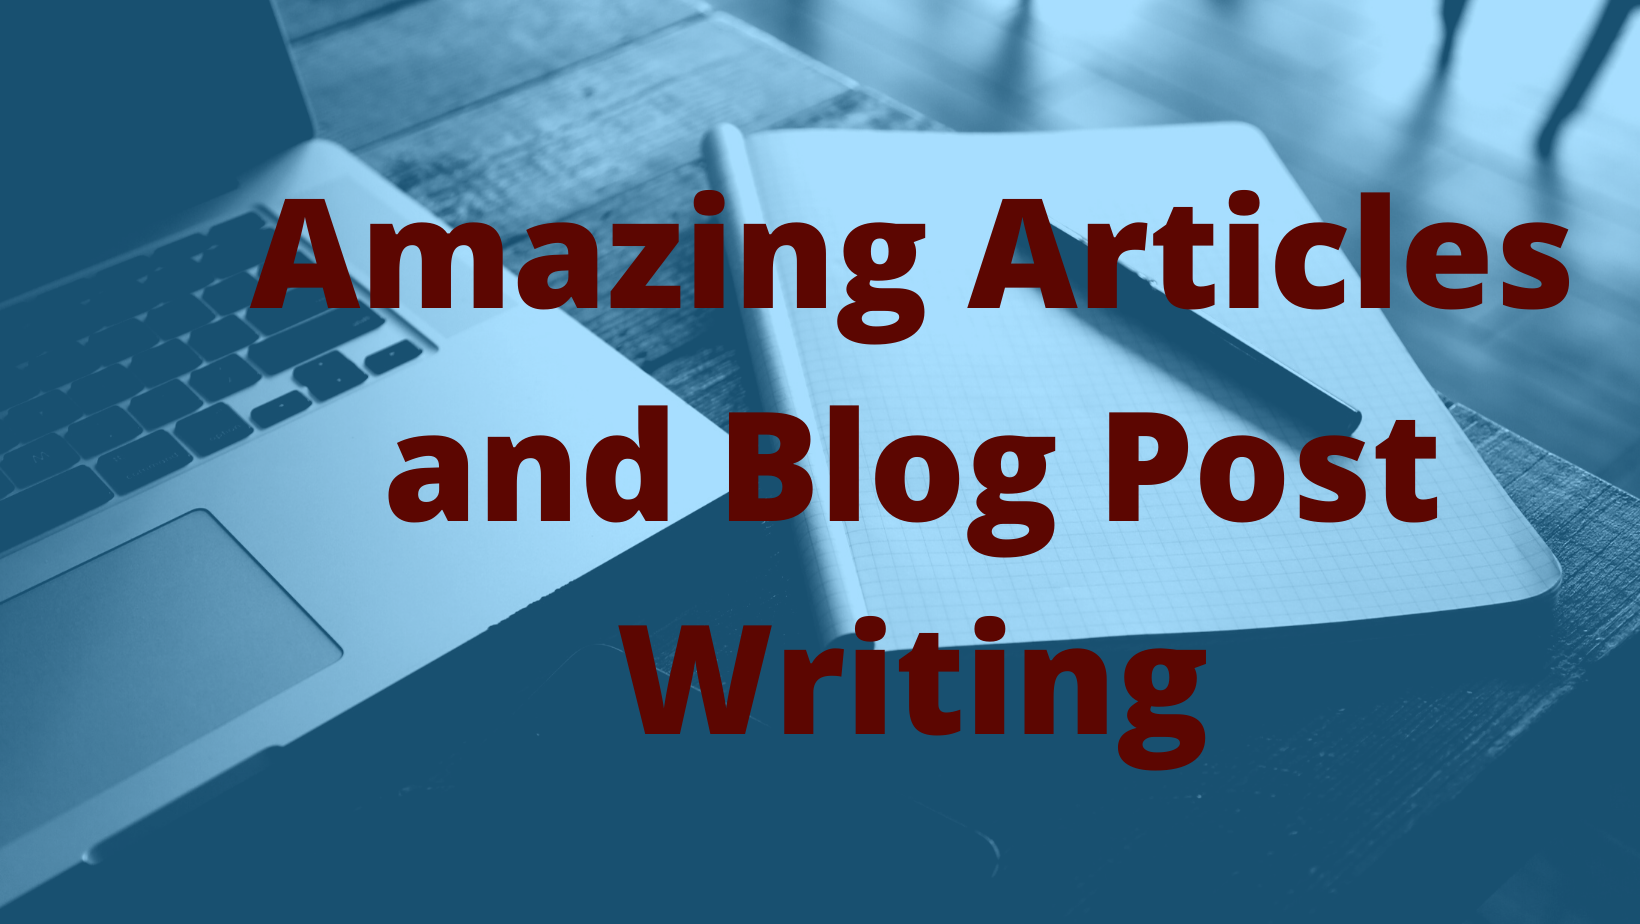 1000 words SEO Optimized Content writing and blog writing for your website